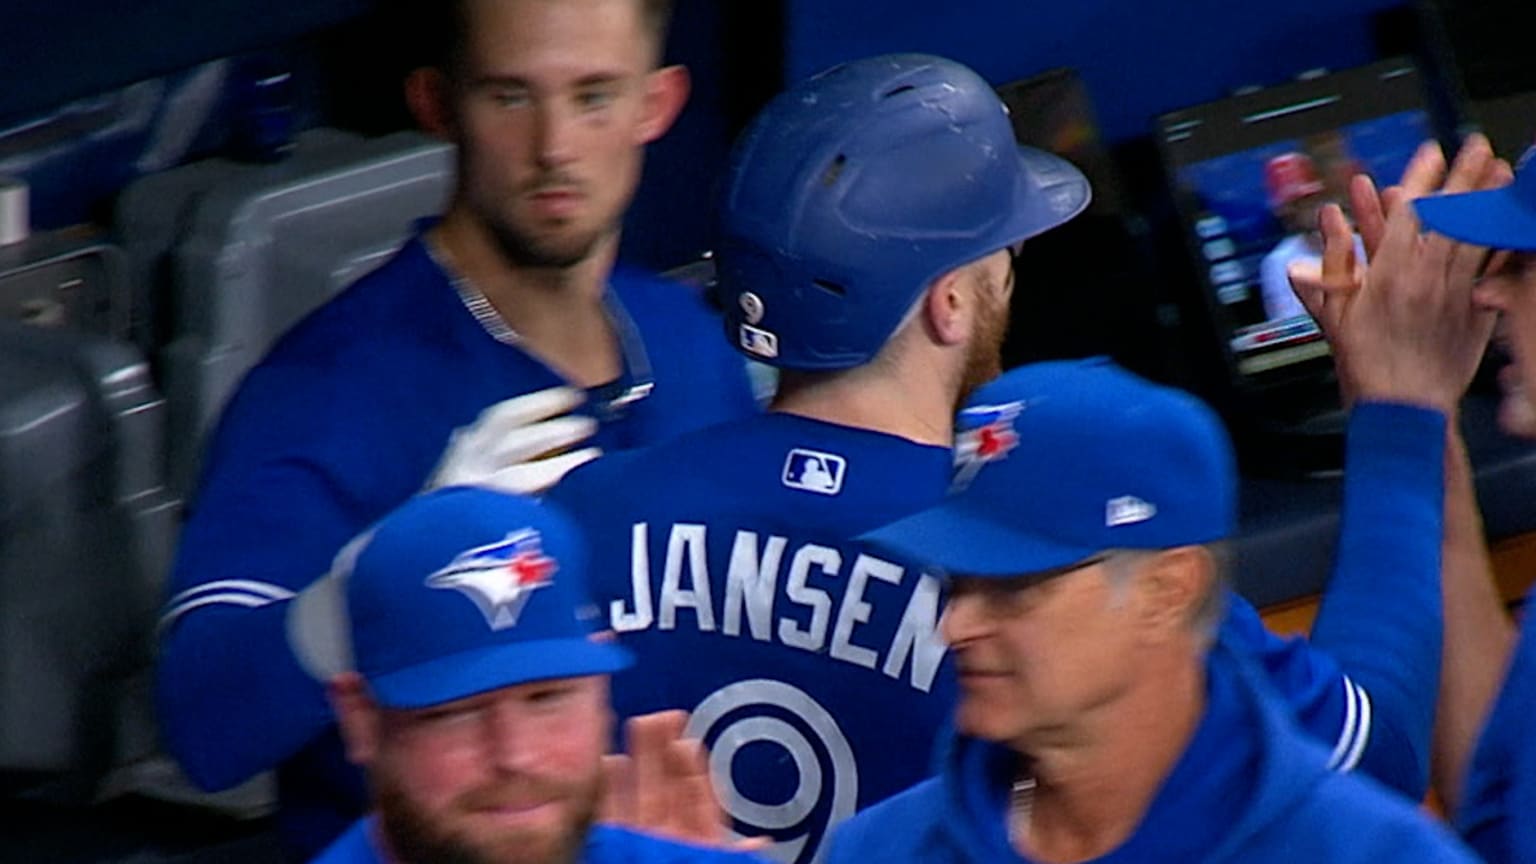 Danny Jansen's double to right, 06/11/2023